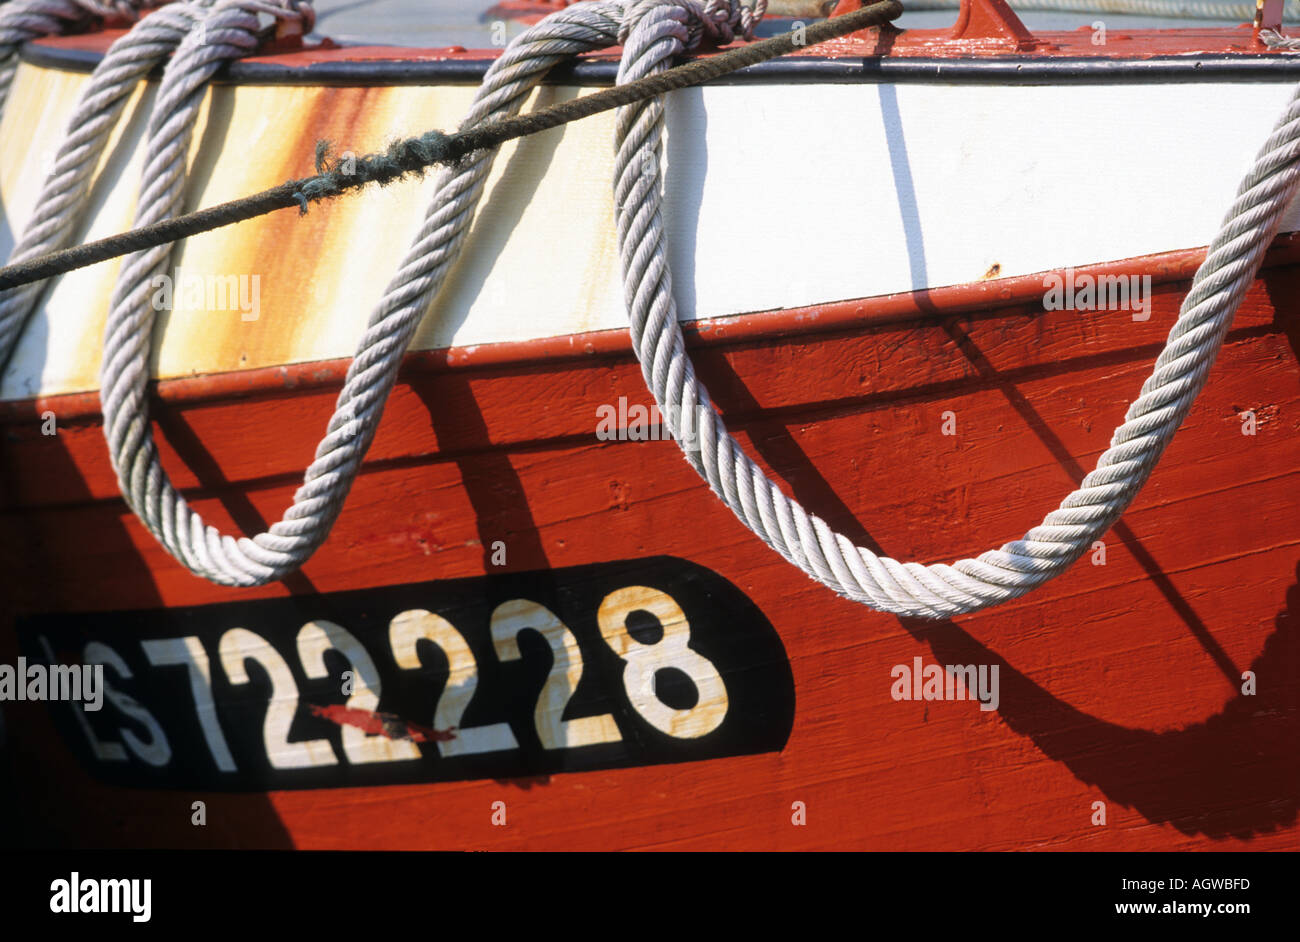 Wooden fish boat in typical colors in France Stock Photo